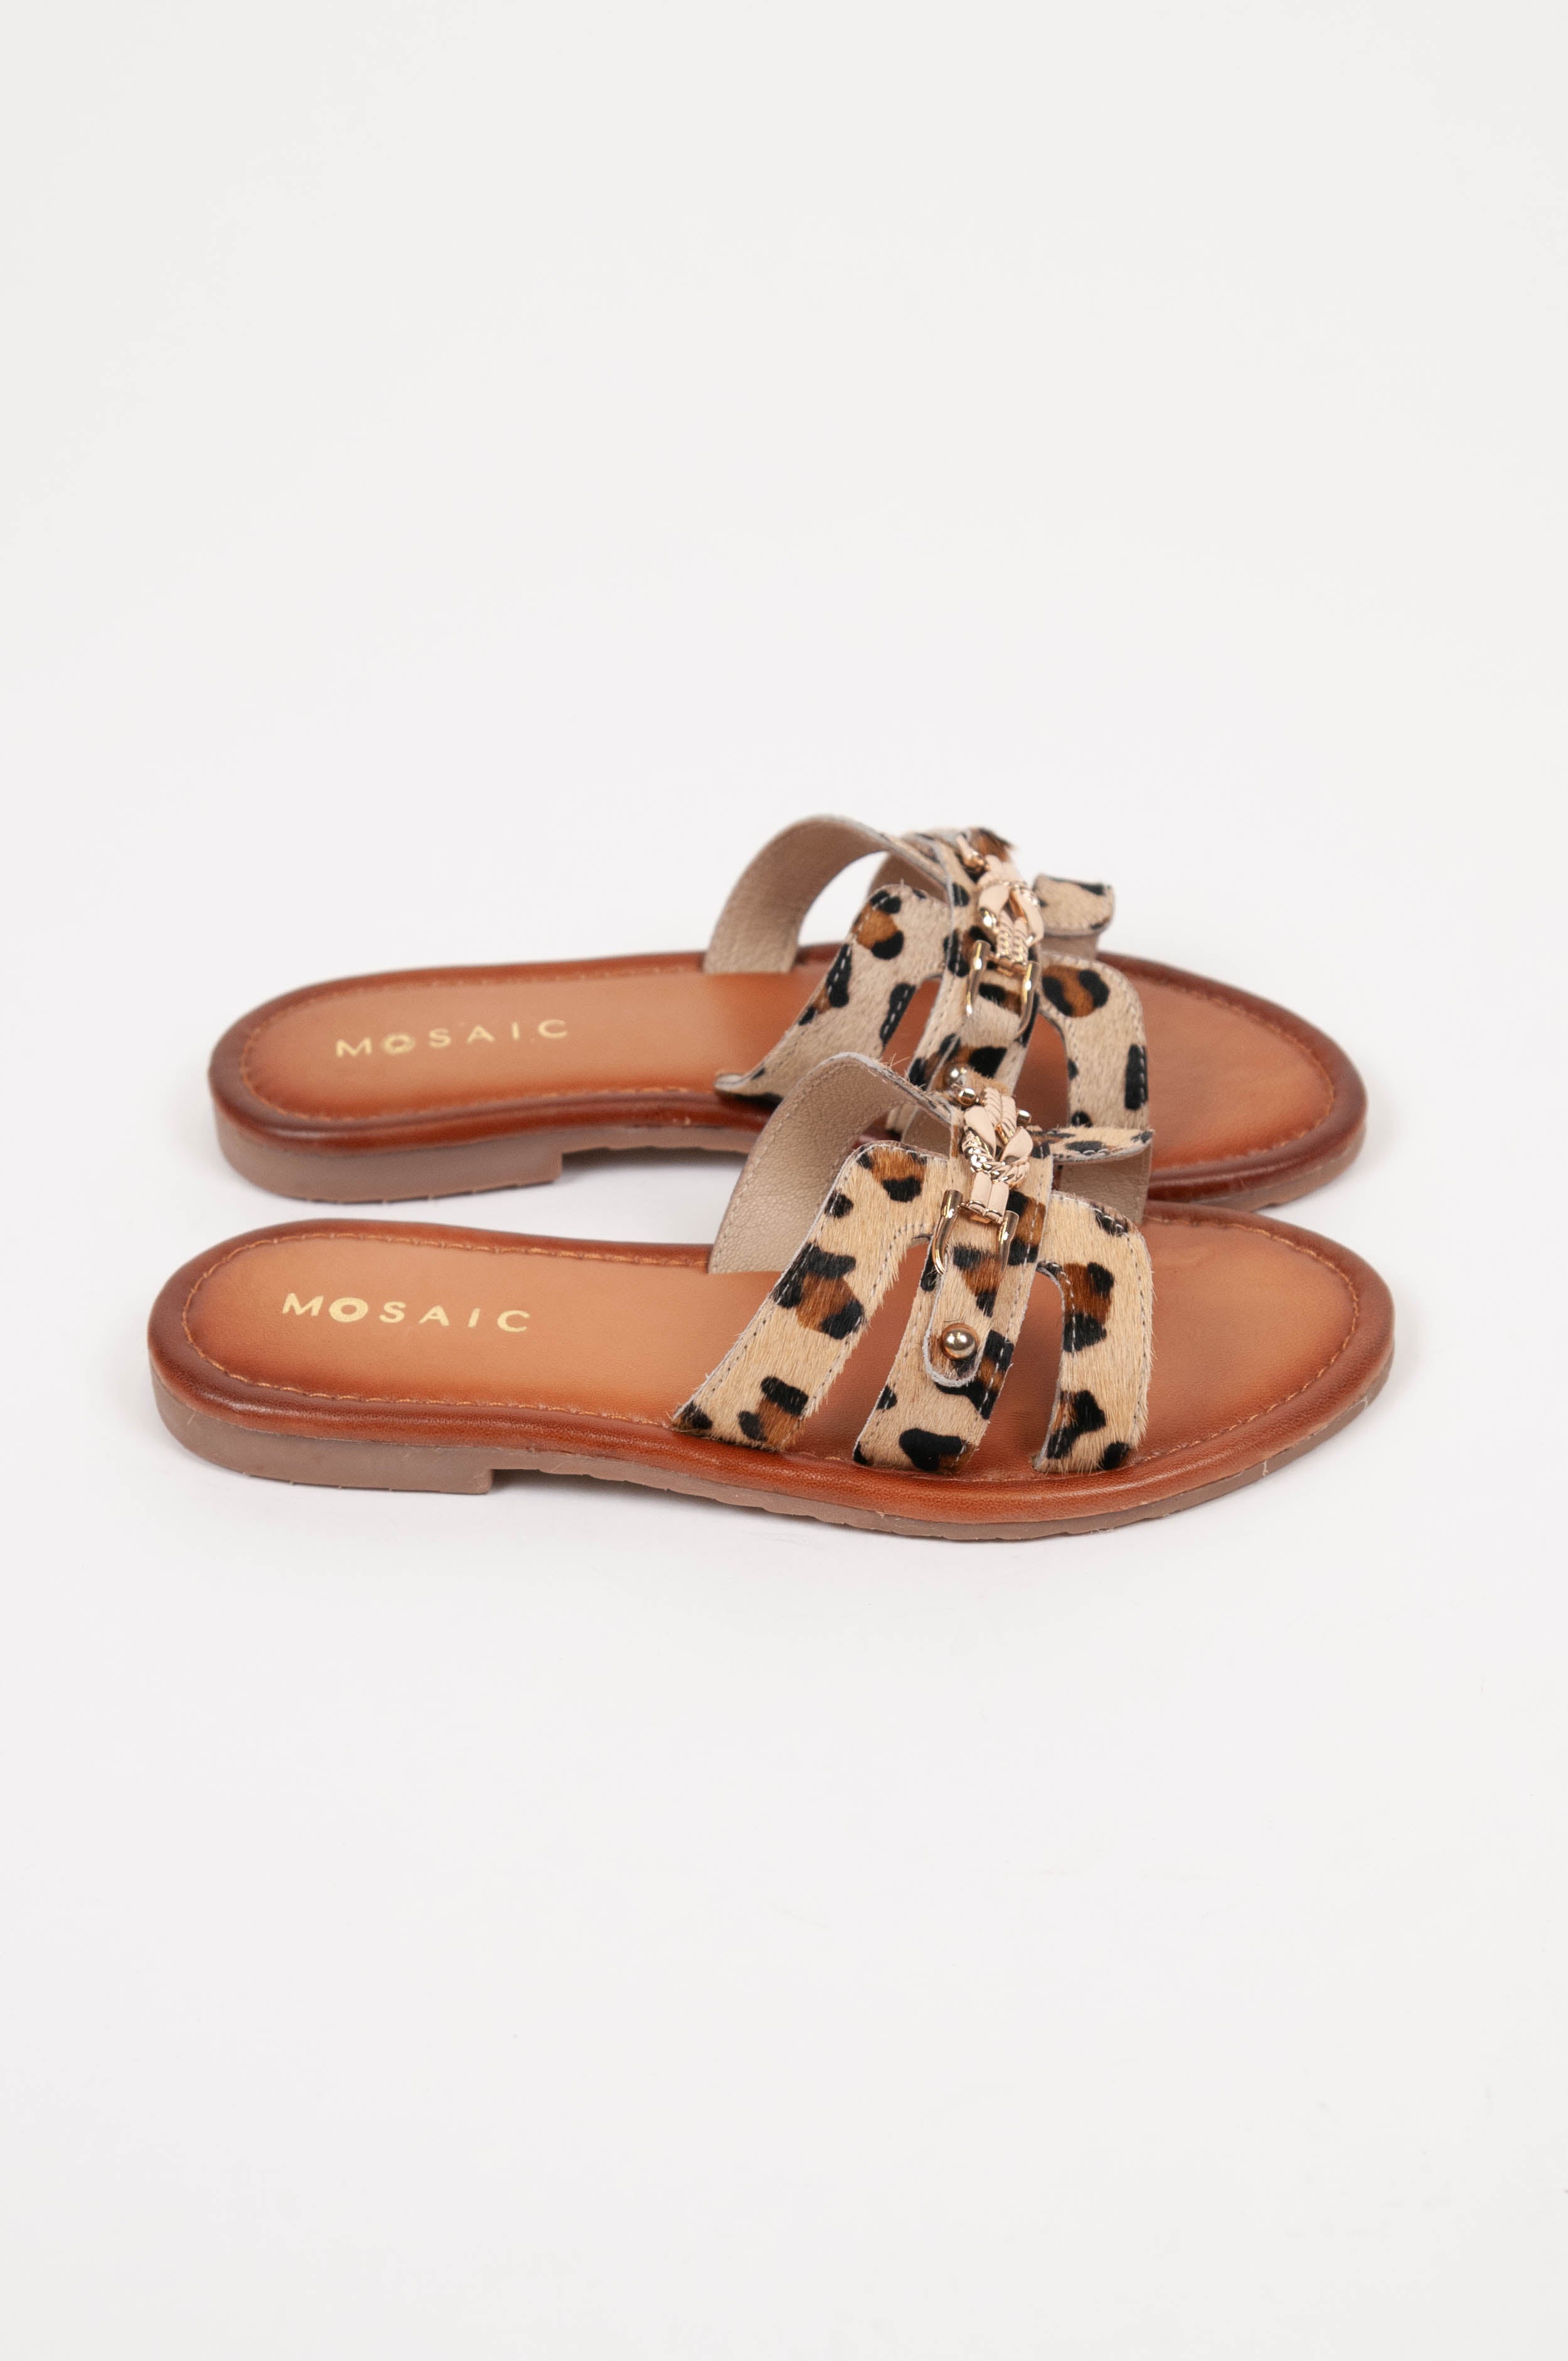 Mosaic - Sandal with spotted pony skin band